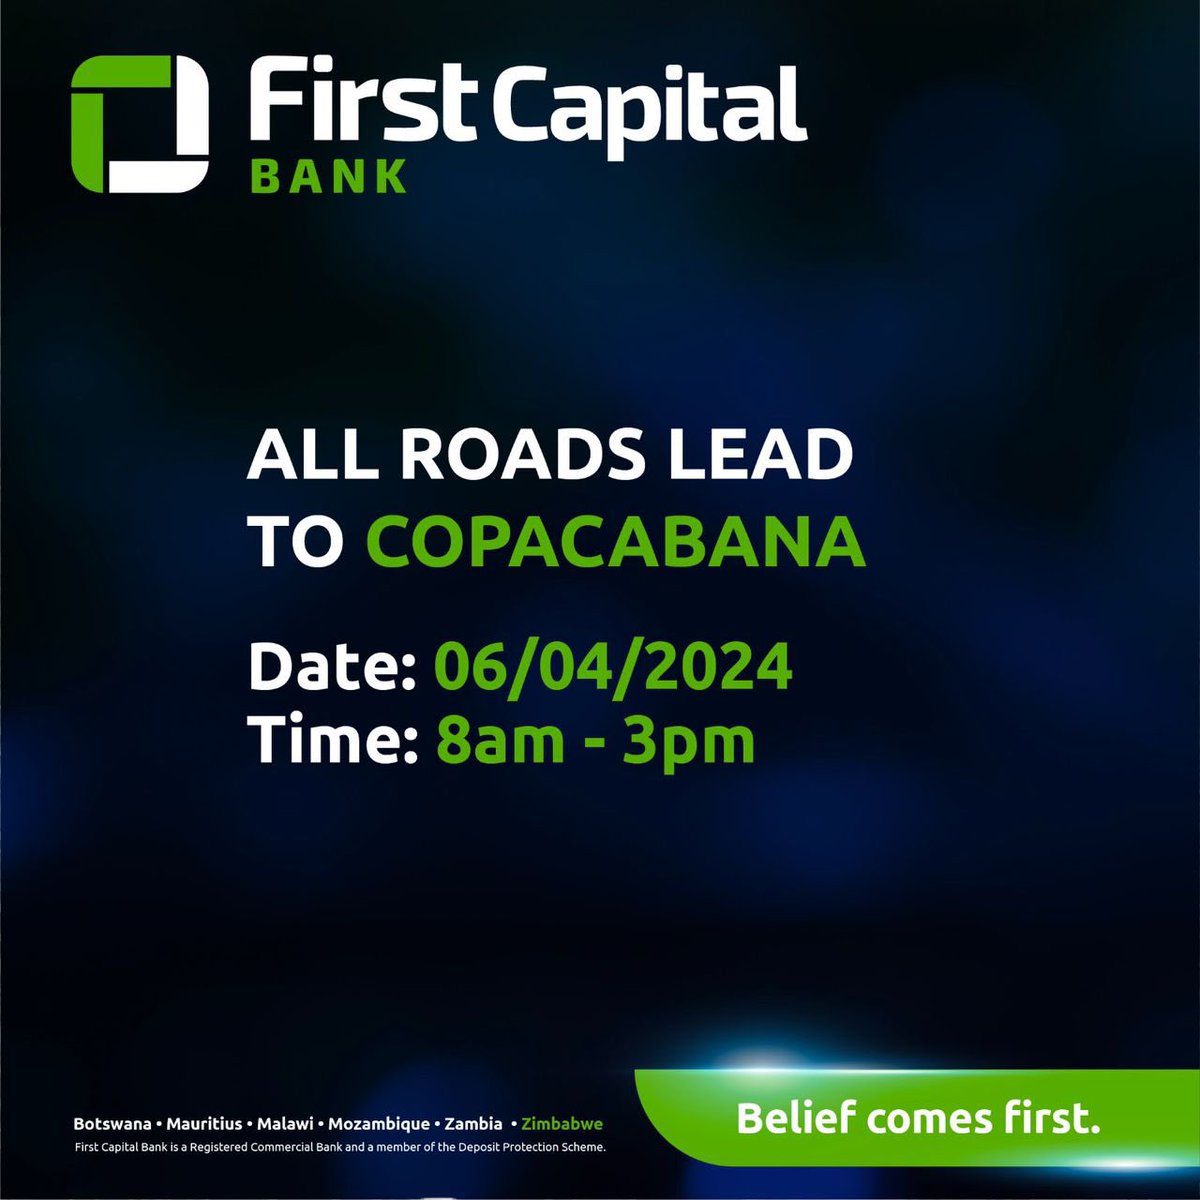 Ngatisanganei ku Copa cabana on Saturday It’s free for all, and stand a chance to win prizes. #BeliefComesFirst